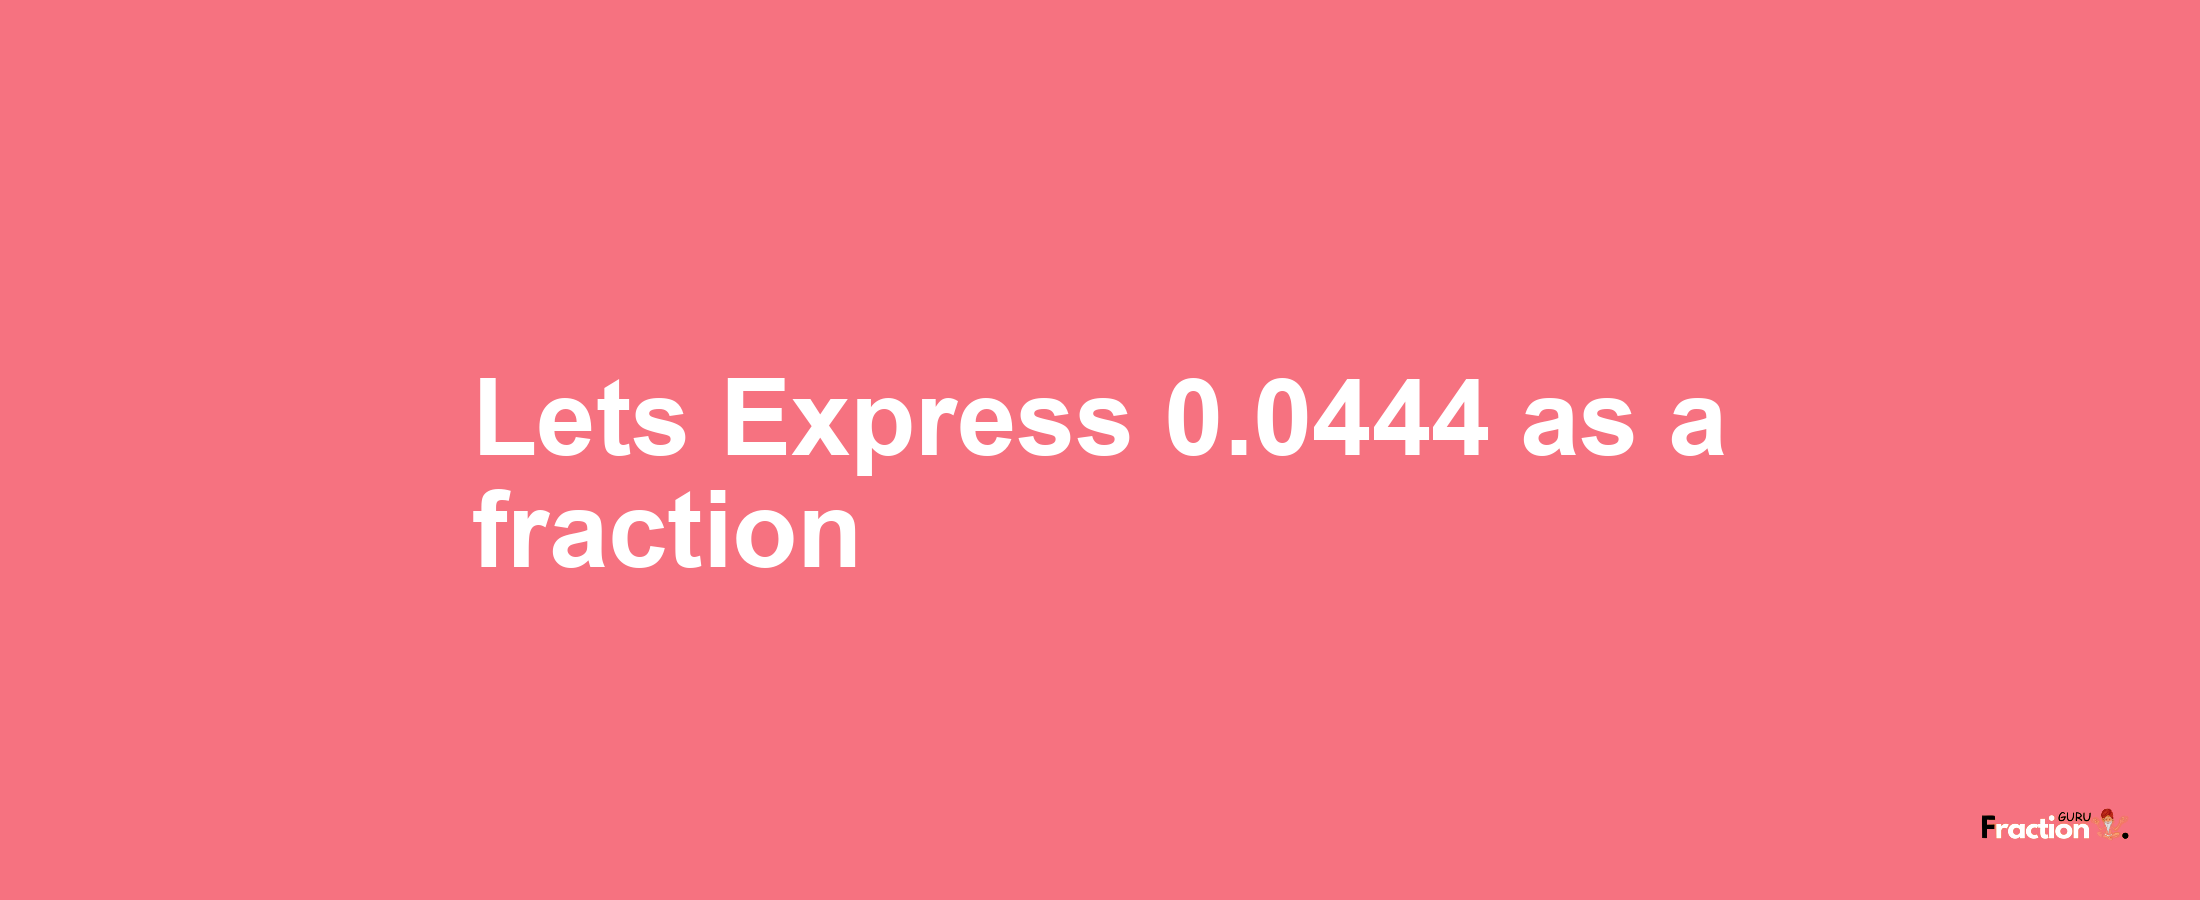 Lets Express 0.0444 as afraction